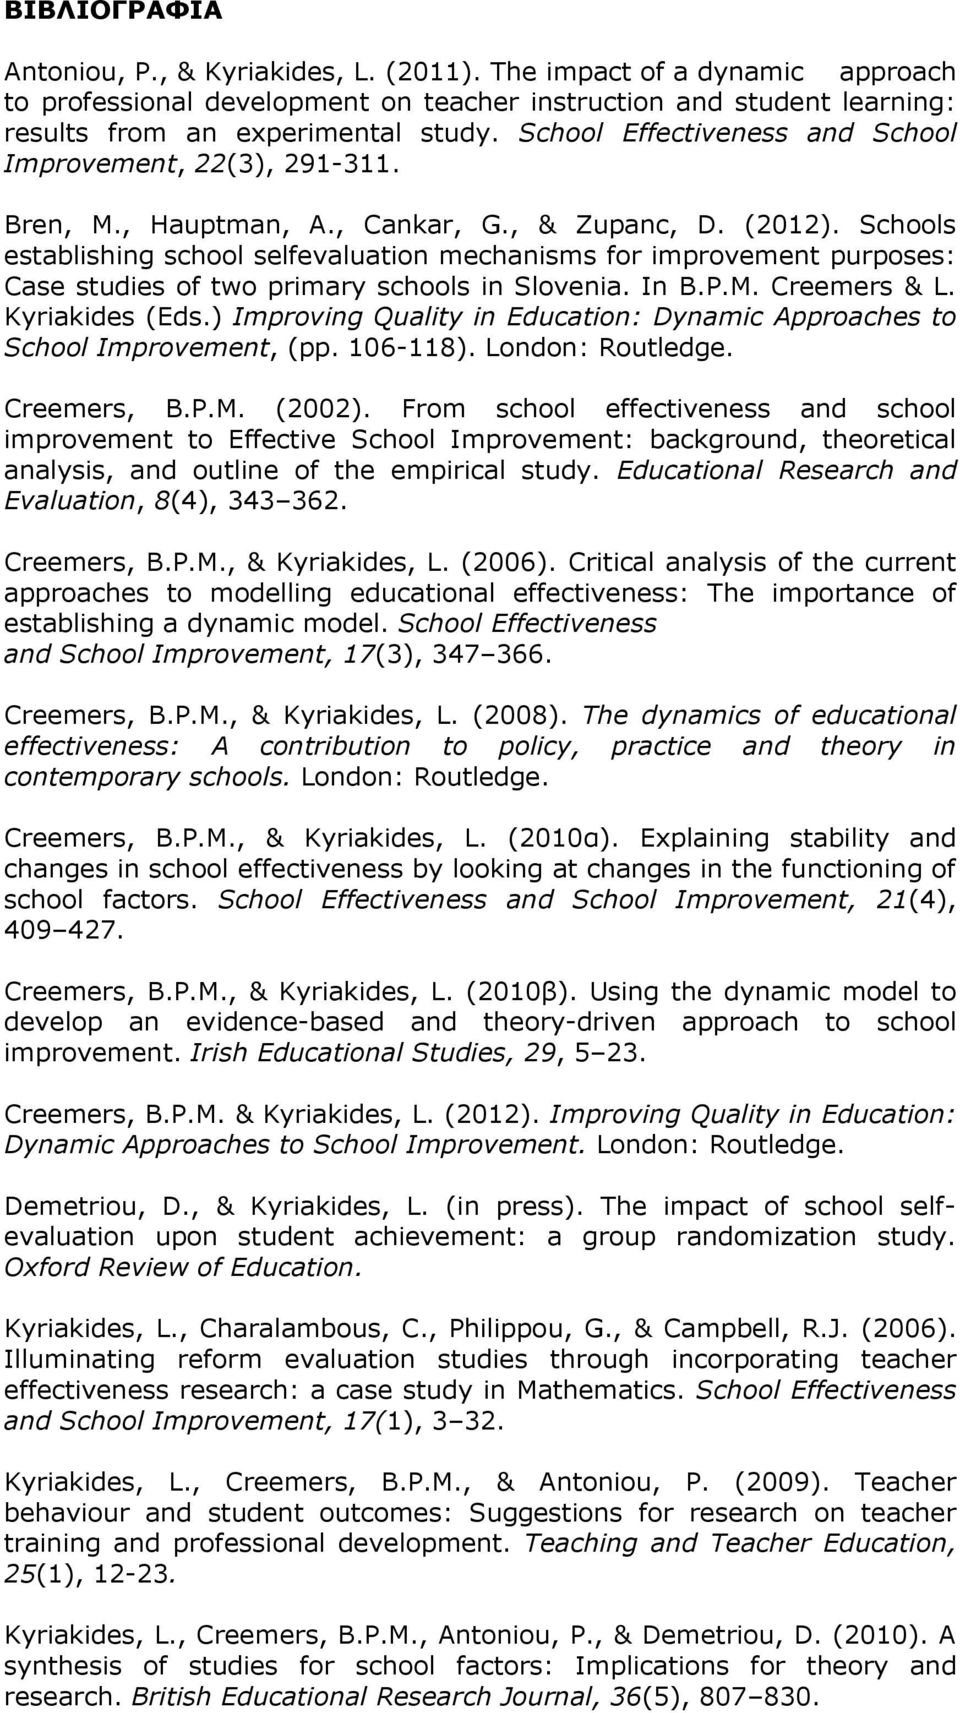 Schools establishing school selfevaluation mechanisms for improvement purposes: Case studies of two primary schools in Slovenia. In B.P.M. Creemers & L. Kyriakides (Eds.